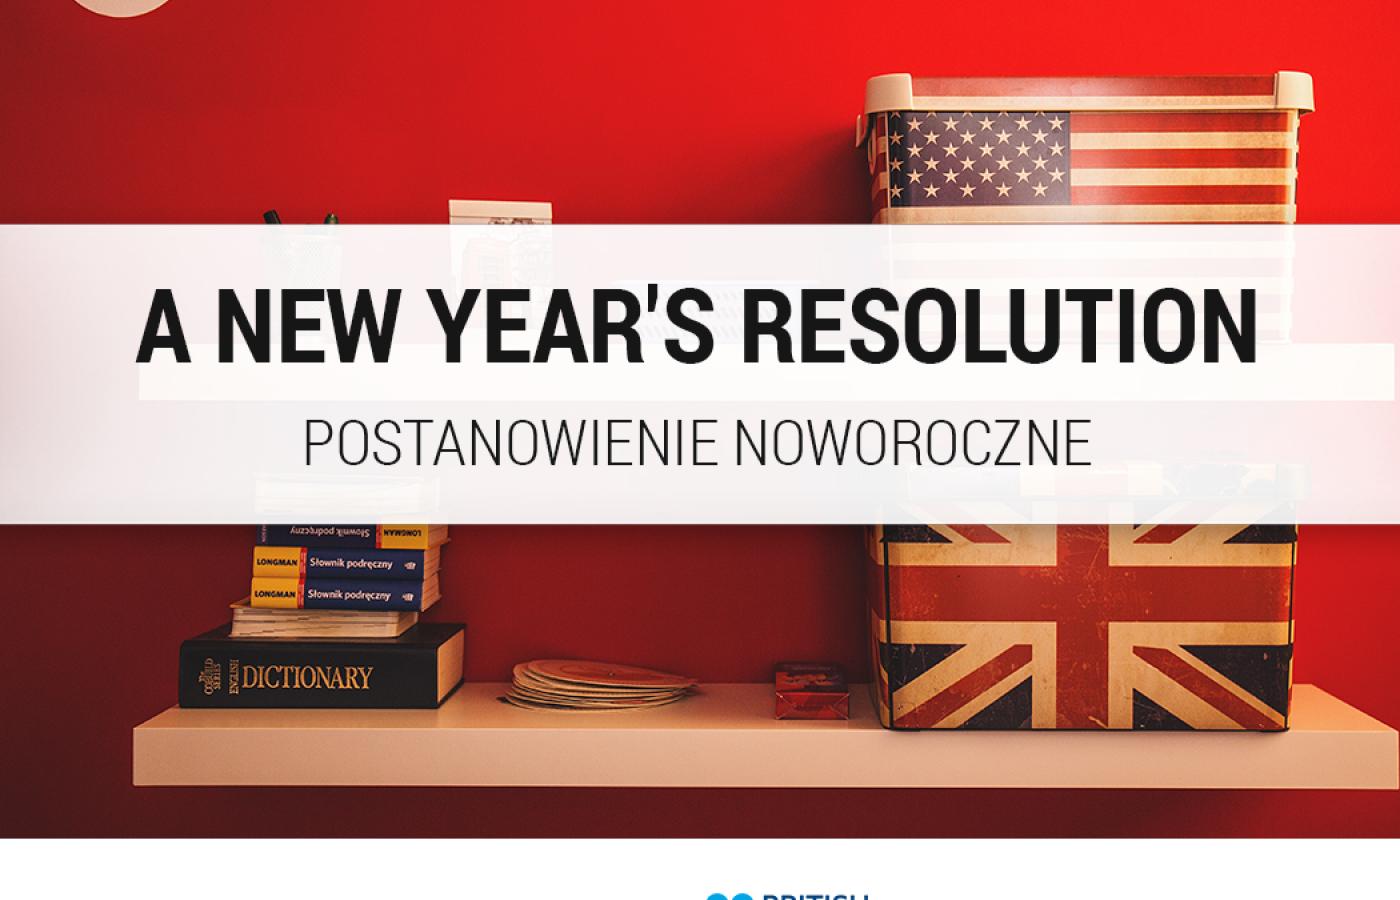 <div align=center><font size=5><b>a New Year's resolution</b><br/>
Tłumaczenie angielskie: A promise that you make to yourself at the start of the year to do something good or stop doing something bad.<br/>
Przykład użycia: Marek's New Year's resolution was to improve his English.</font></div>